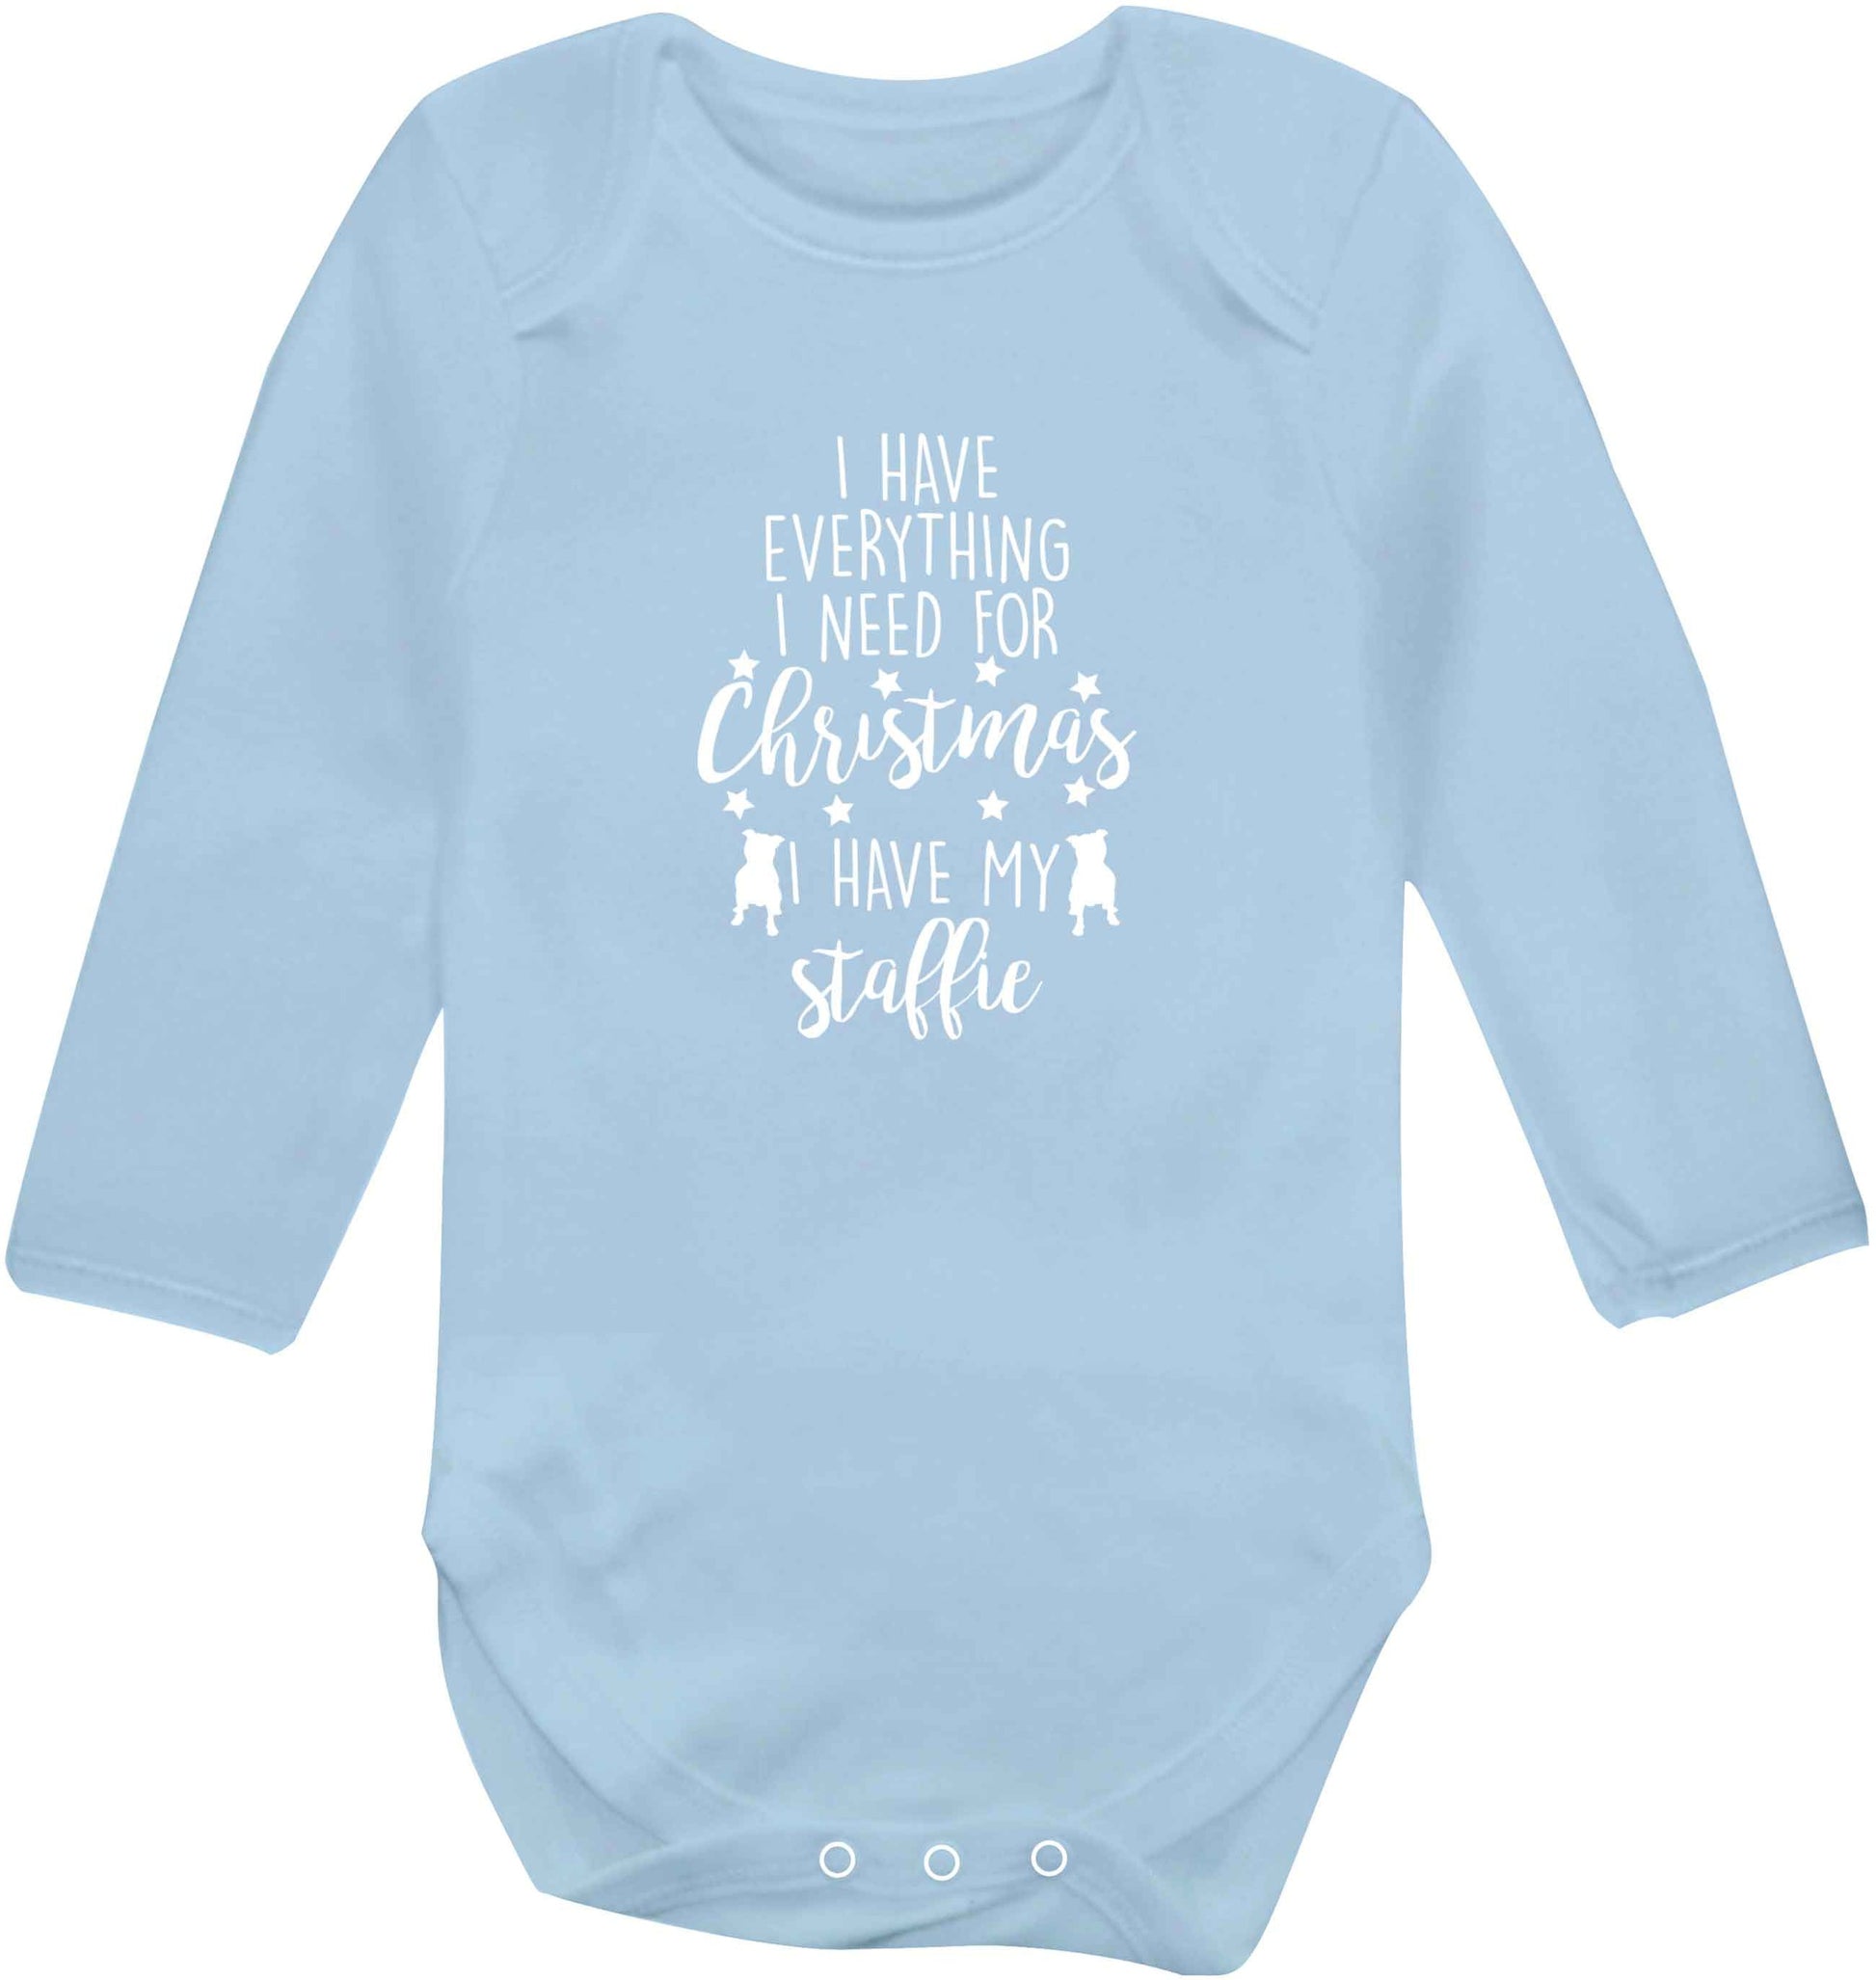 I have everything I need for Christmas I have my staffie baby vest long sleeved pale blue 6-12 months